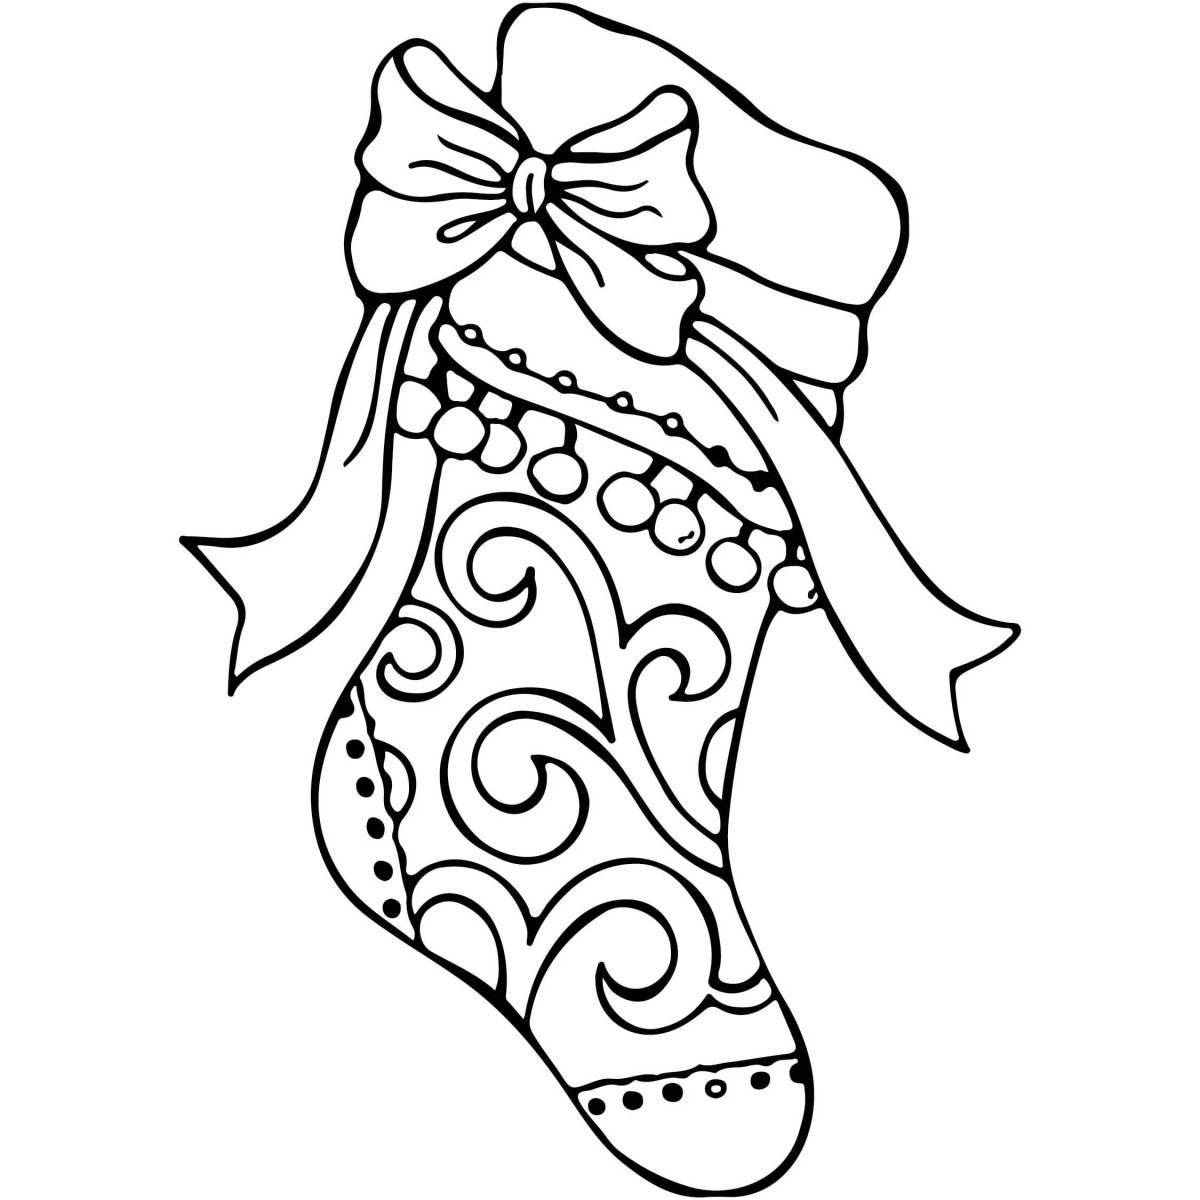 Animated stocking coloring page